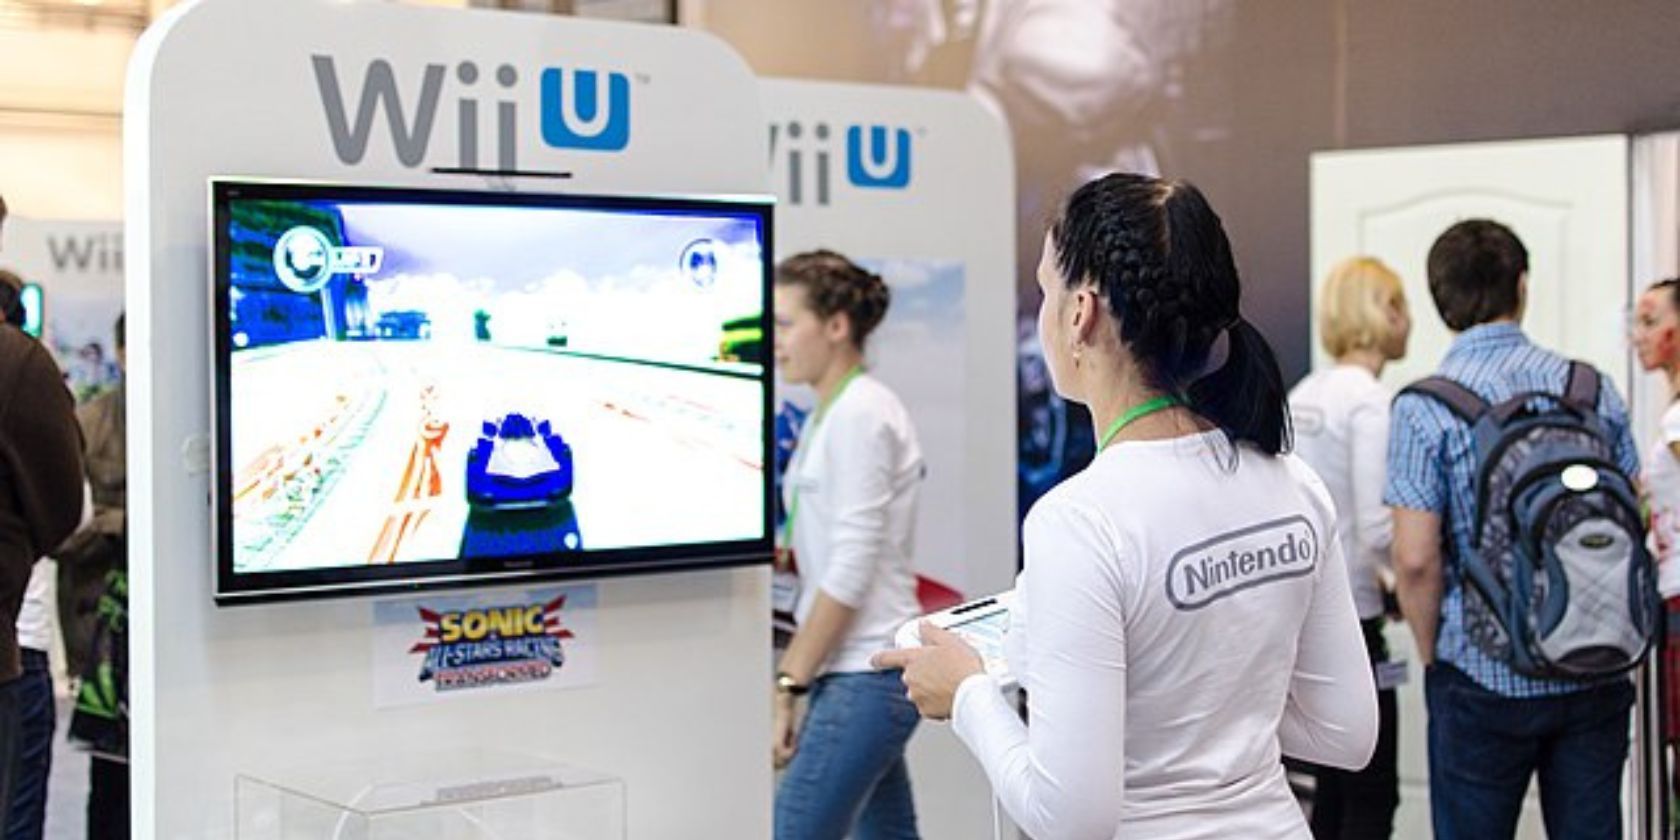 A girl playing a Wii u at a Wii U event